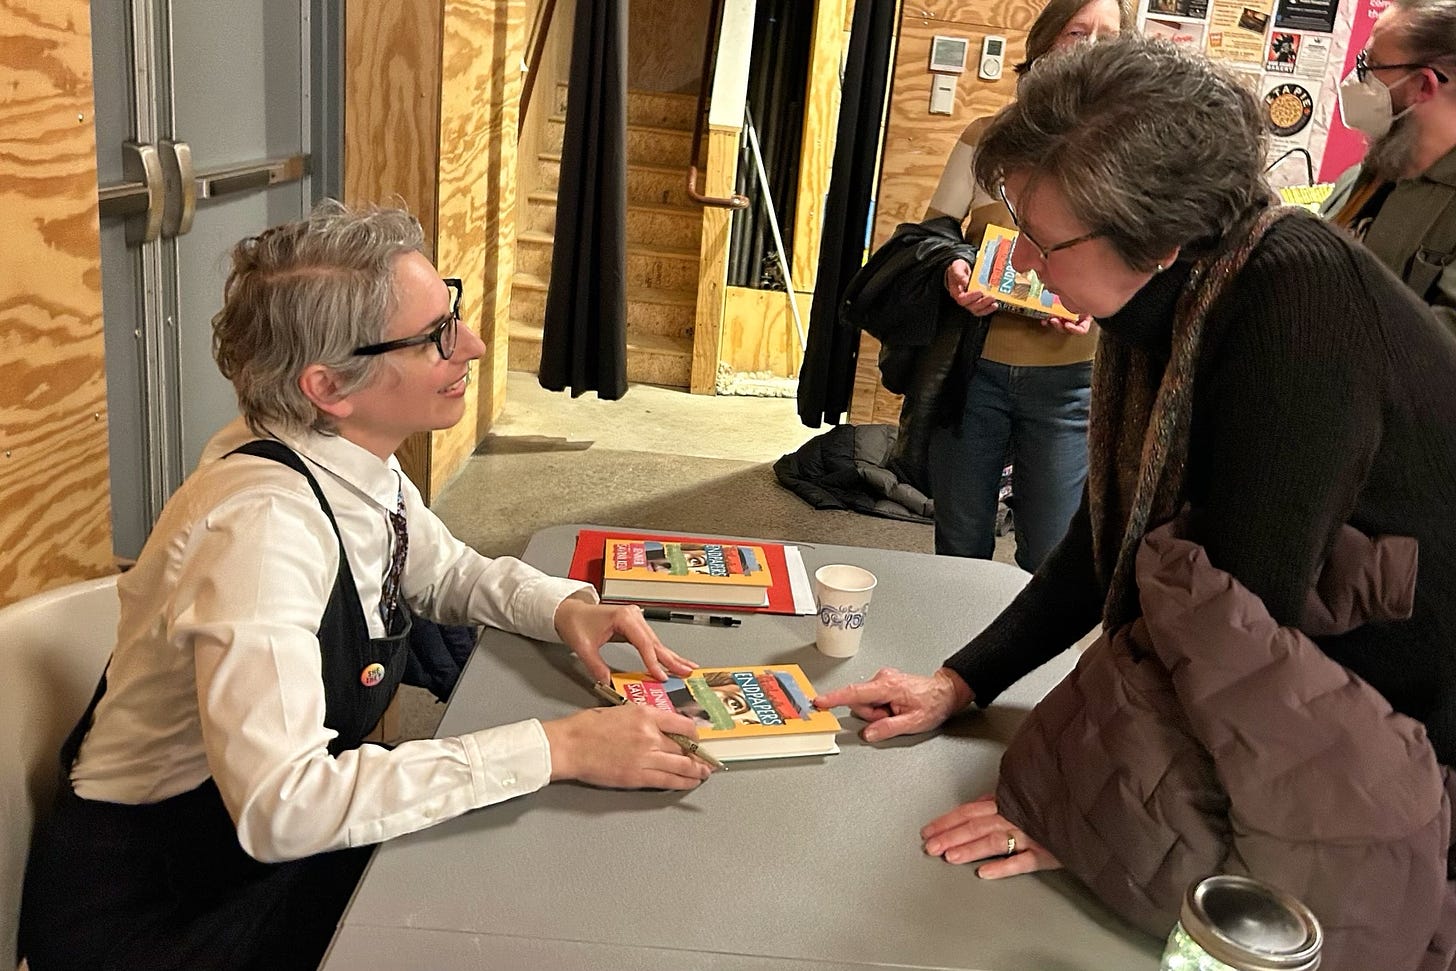 Left: I'm sitting behind a table with two copies of Endpapers in front of me. Standing across from me (right) is a woman leaning on the table, telling me who to sign her book copy for. I'm smiling at her. Behind her more people hang out and wait in line.